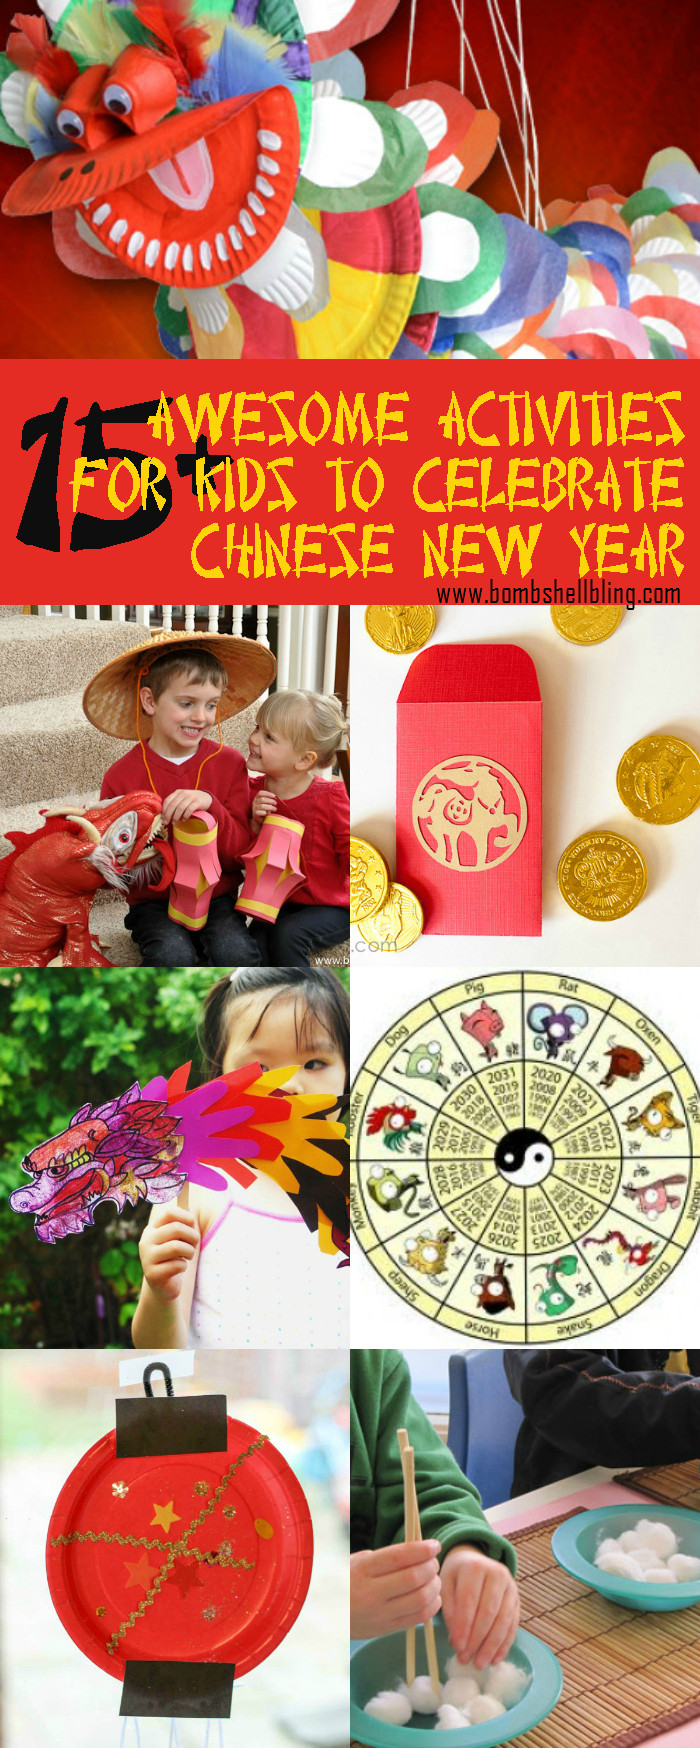 New Year Craft For Kids
 Chinese New Year Activities to Help Kids Celebrate